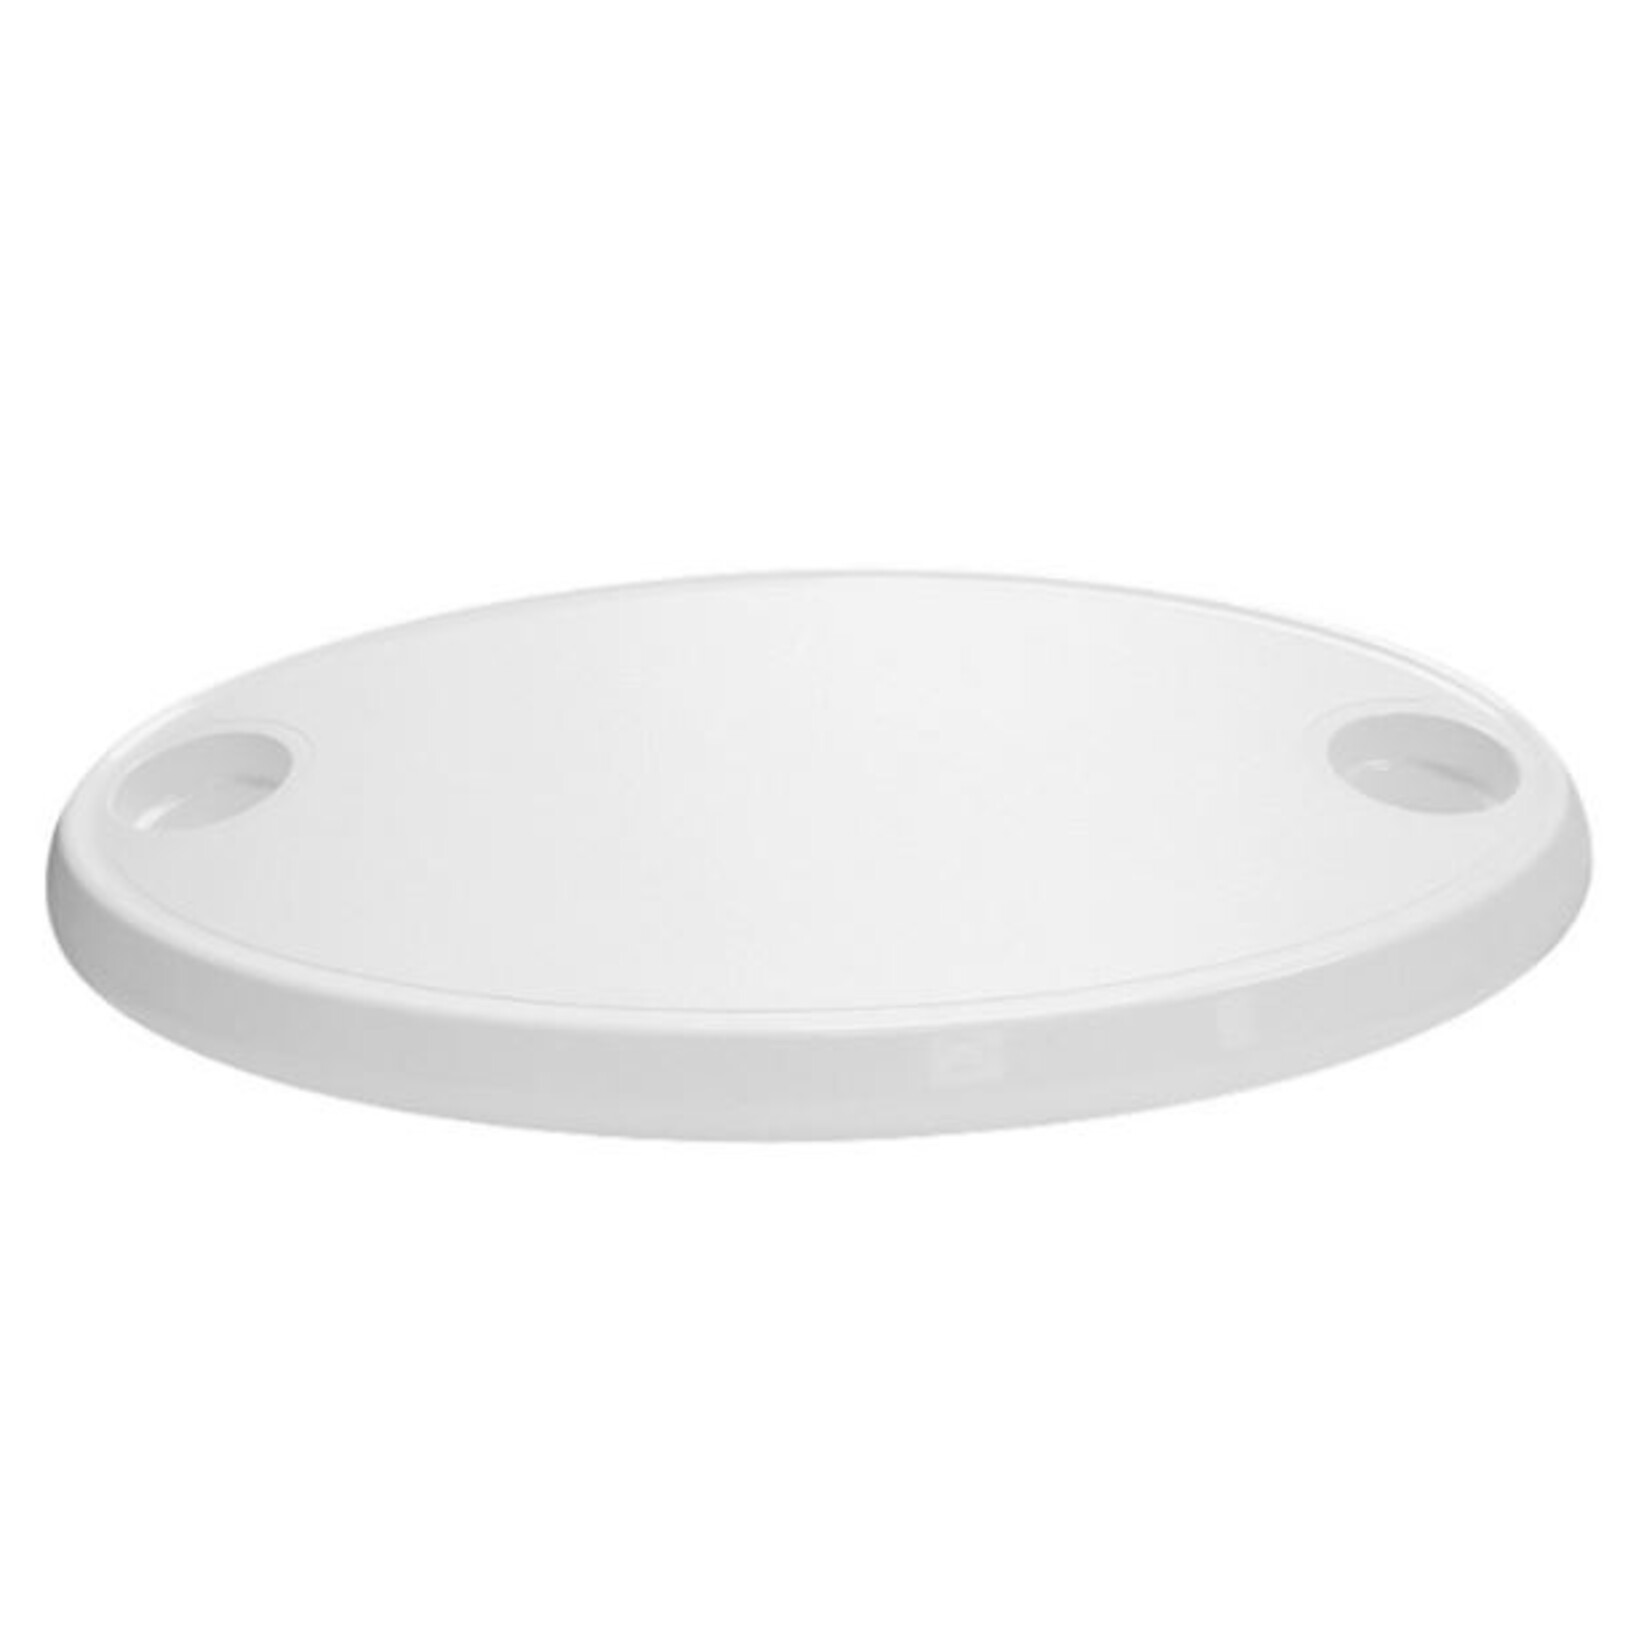 Plastimo Oval table top white